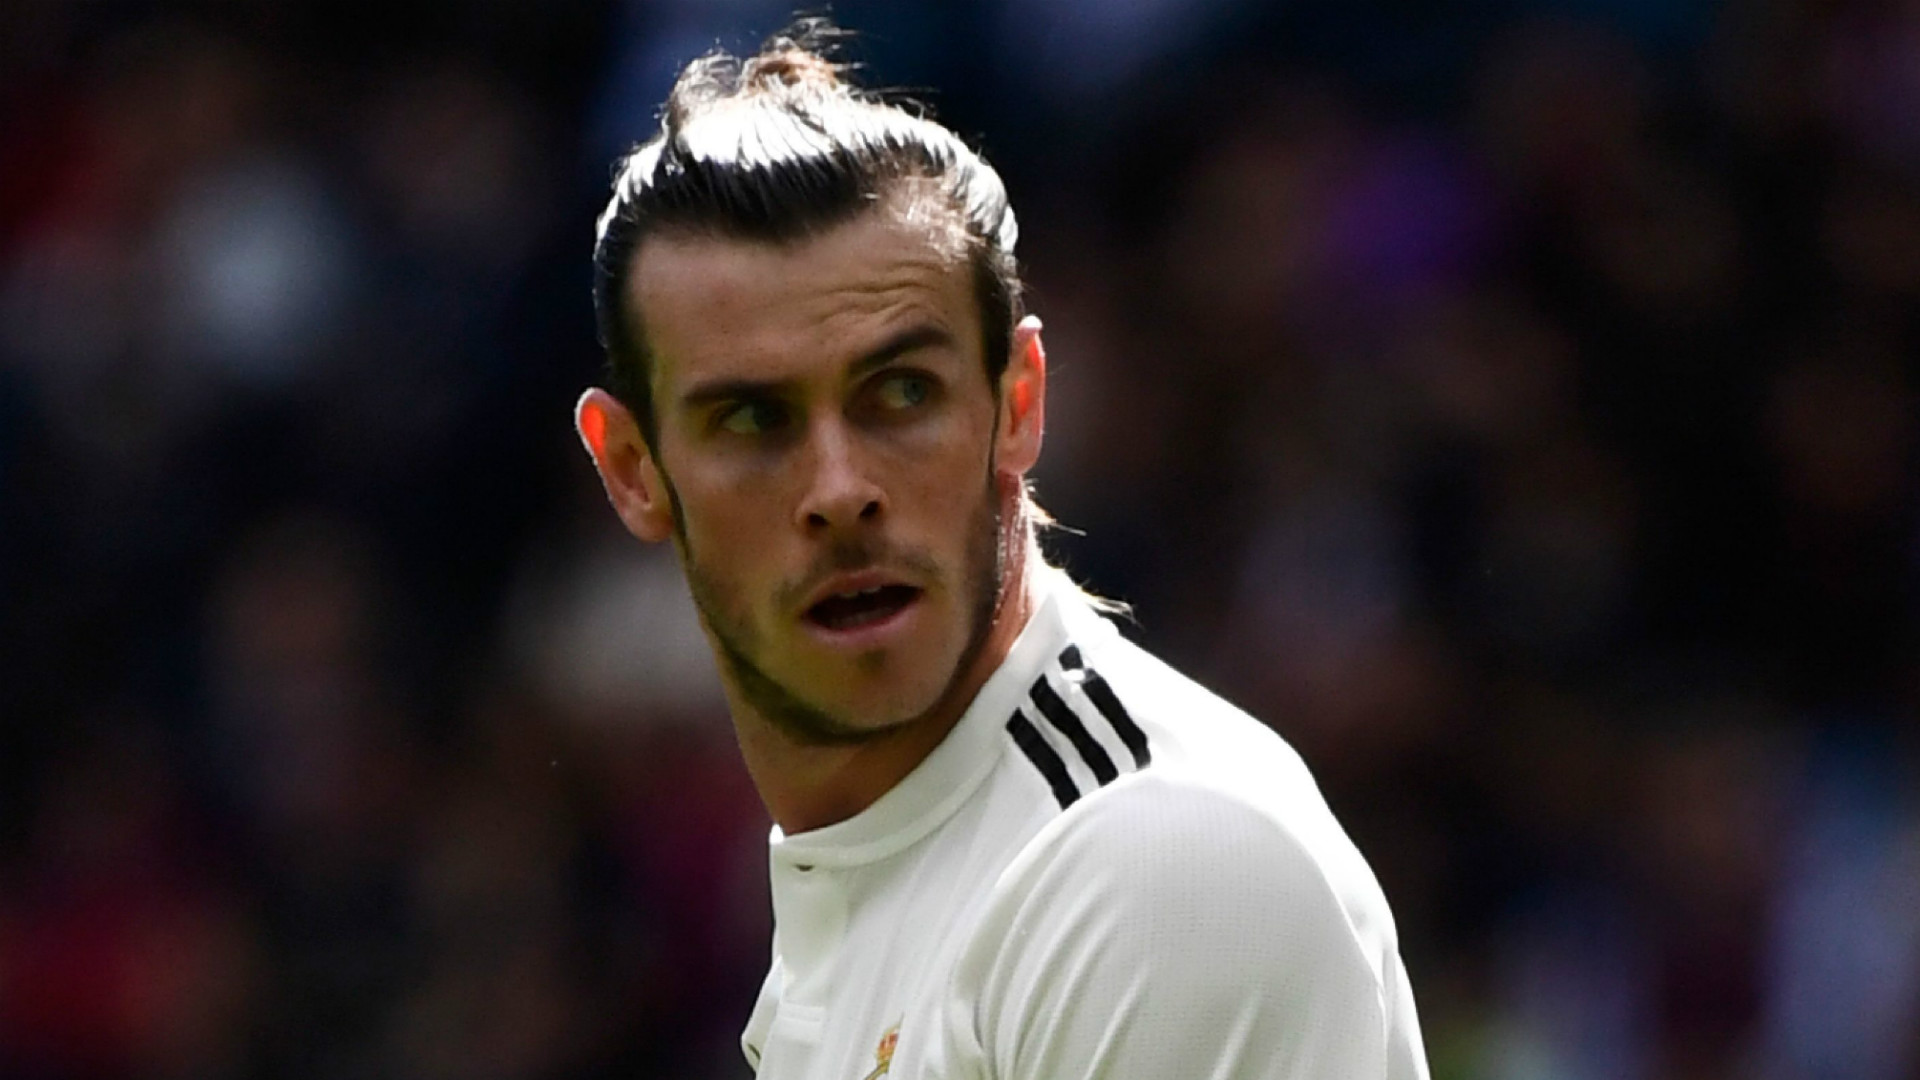 Transfer news and rumours LIVE: Real Madrid set €130m price tag on Bale | Goal.com1920 x 1080